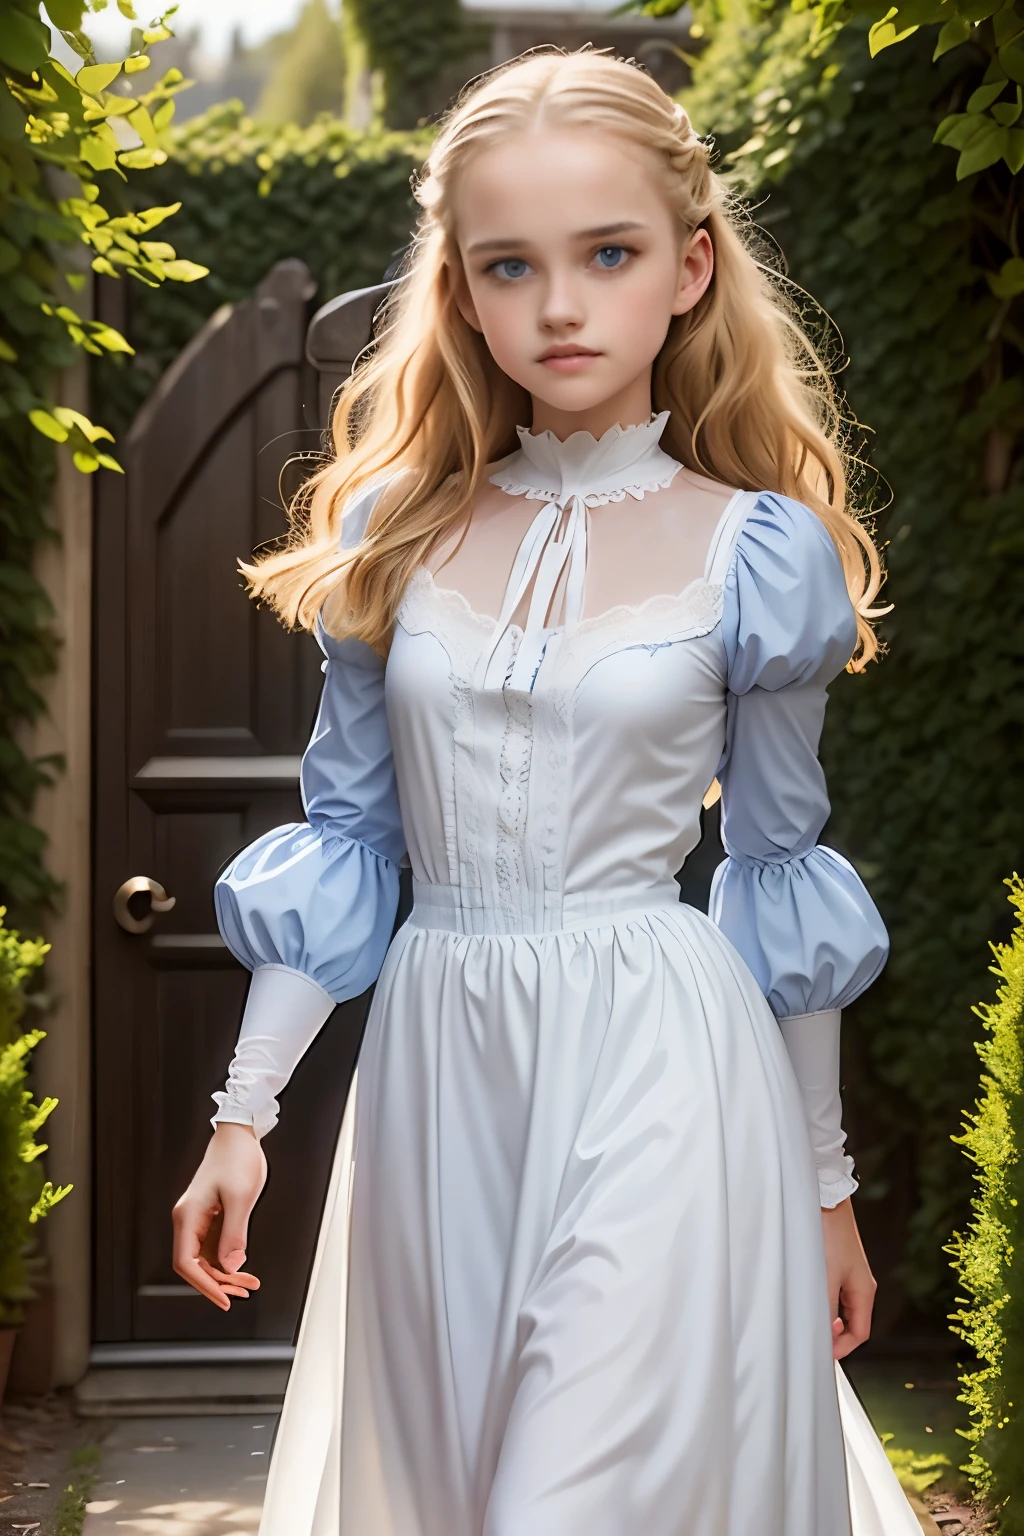 Virginia Otis, 15 years old (blond hair, blue eyes), thin, cute face, walks at night in Canterville Castle (inspired by the novel The Canterville Ghost). aged 1887, Victorian dark fantasy